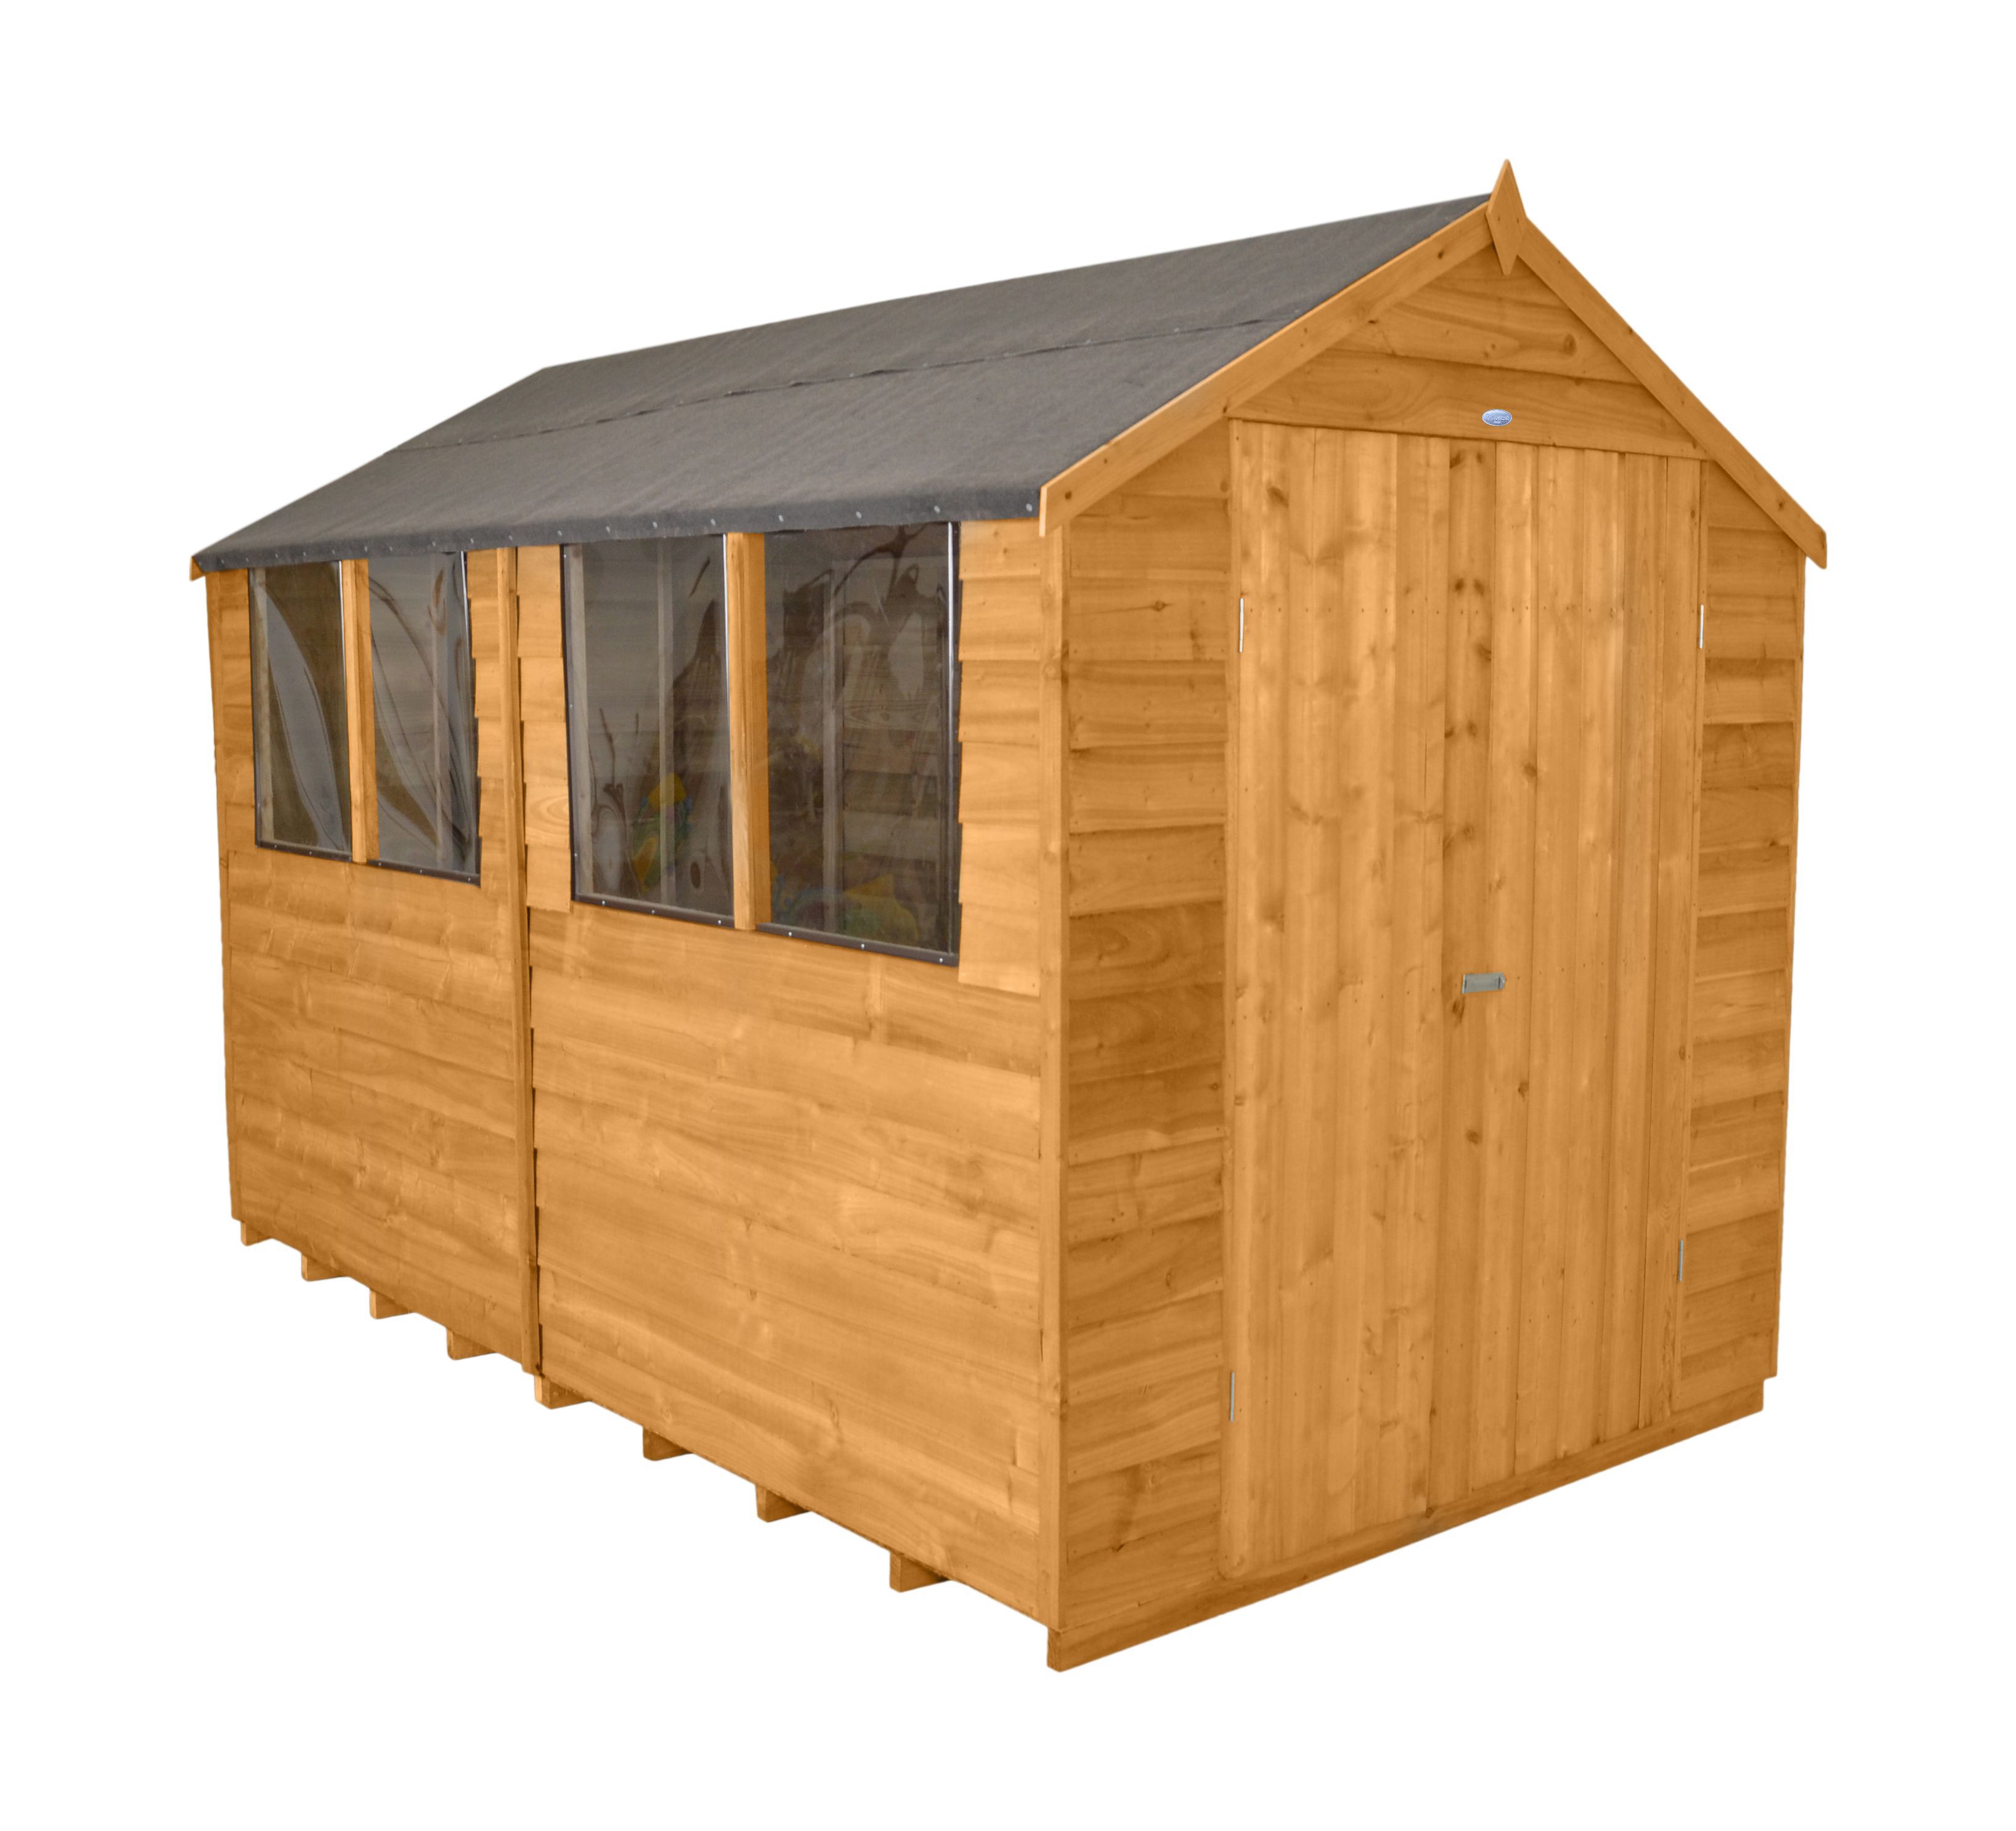 Forest Garden 10x8 Apex Overlap Wooden Shed - Assembly service included